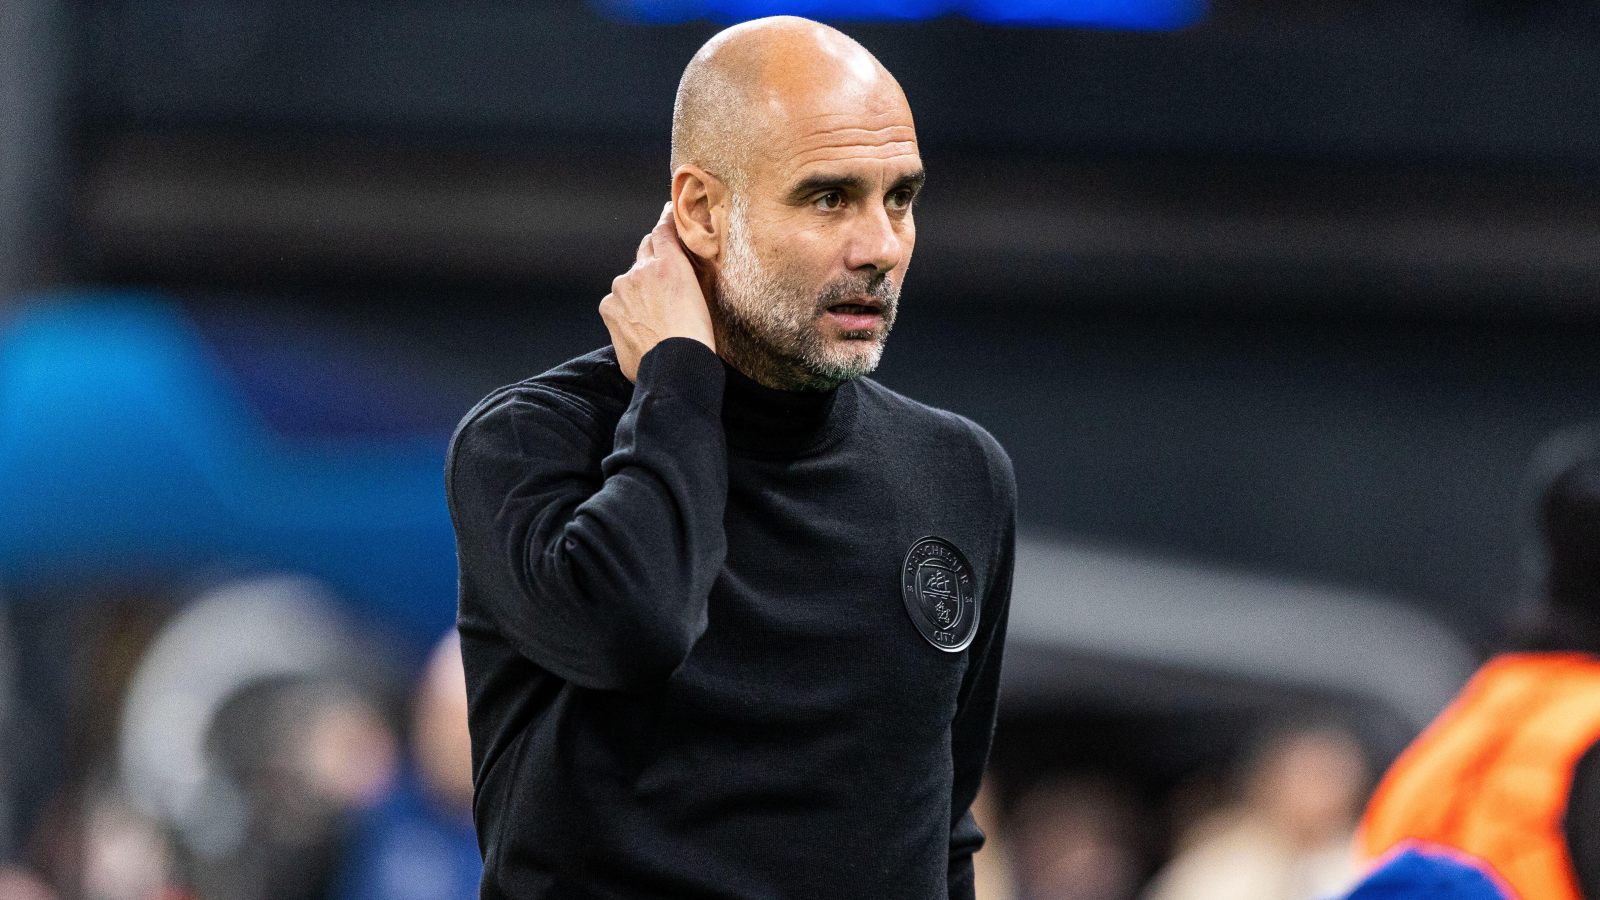 Newcastle United and Manchester United are Premier League title rivals, says Pep Guardiola